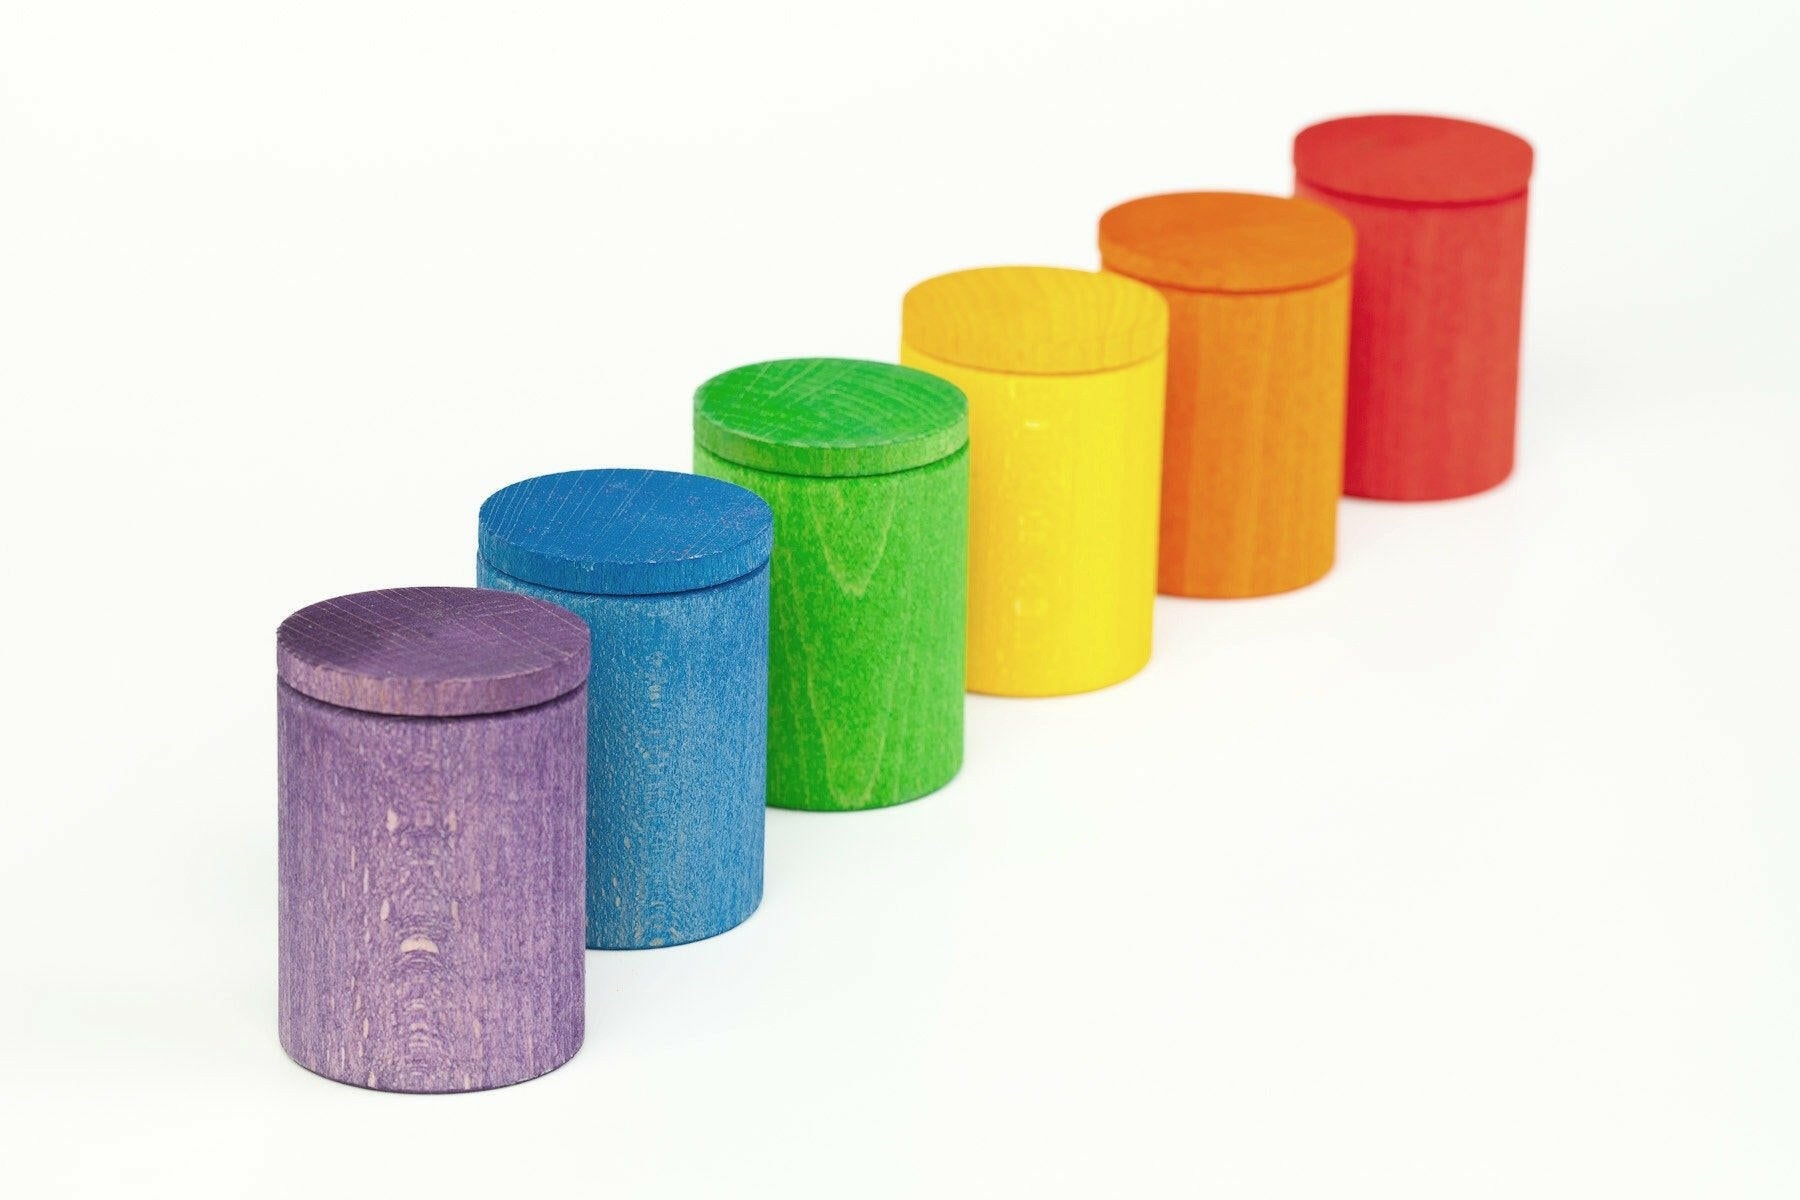 Grapat Grapat Cups with Lid (Rainbow Coloured) - 6 pieces Grapat